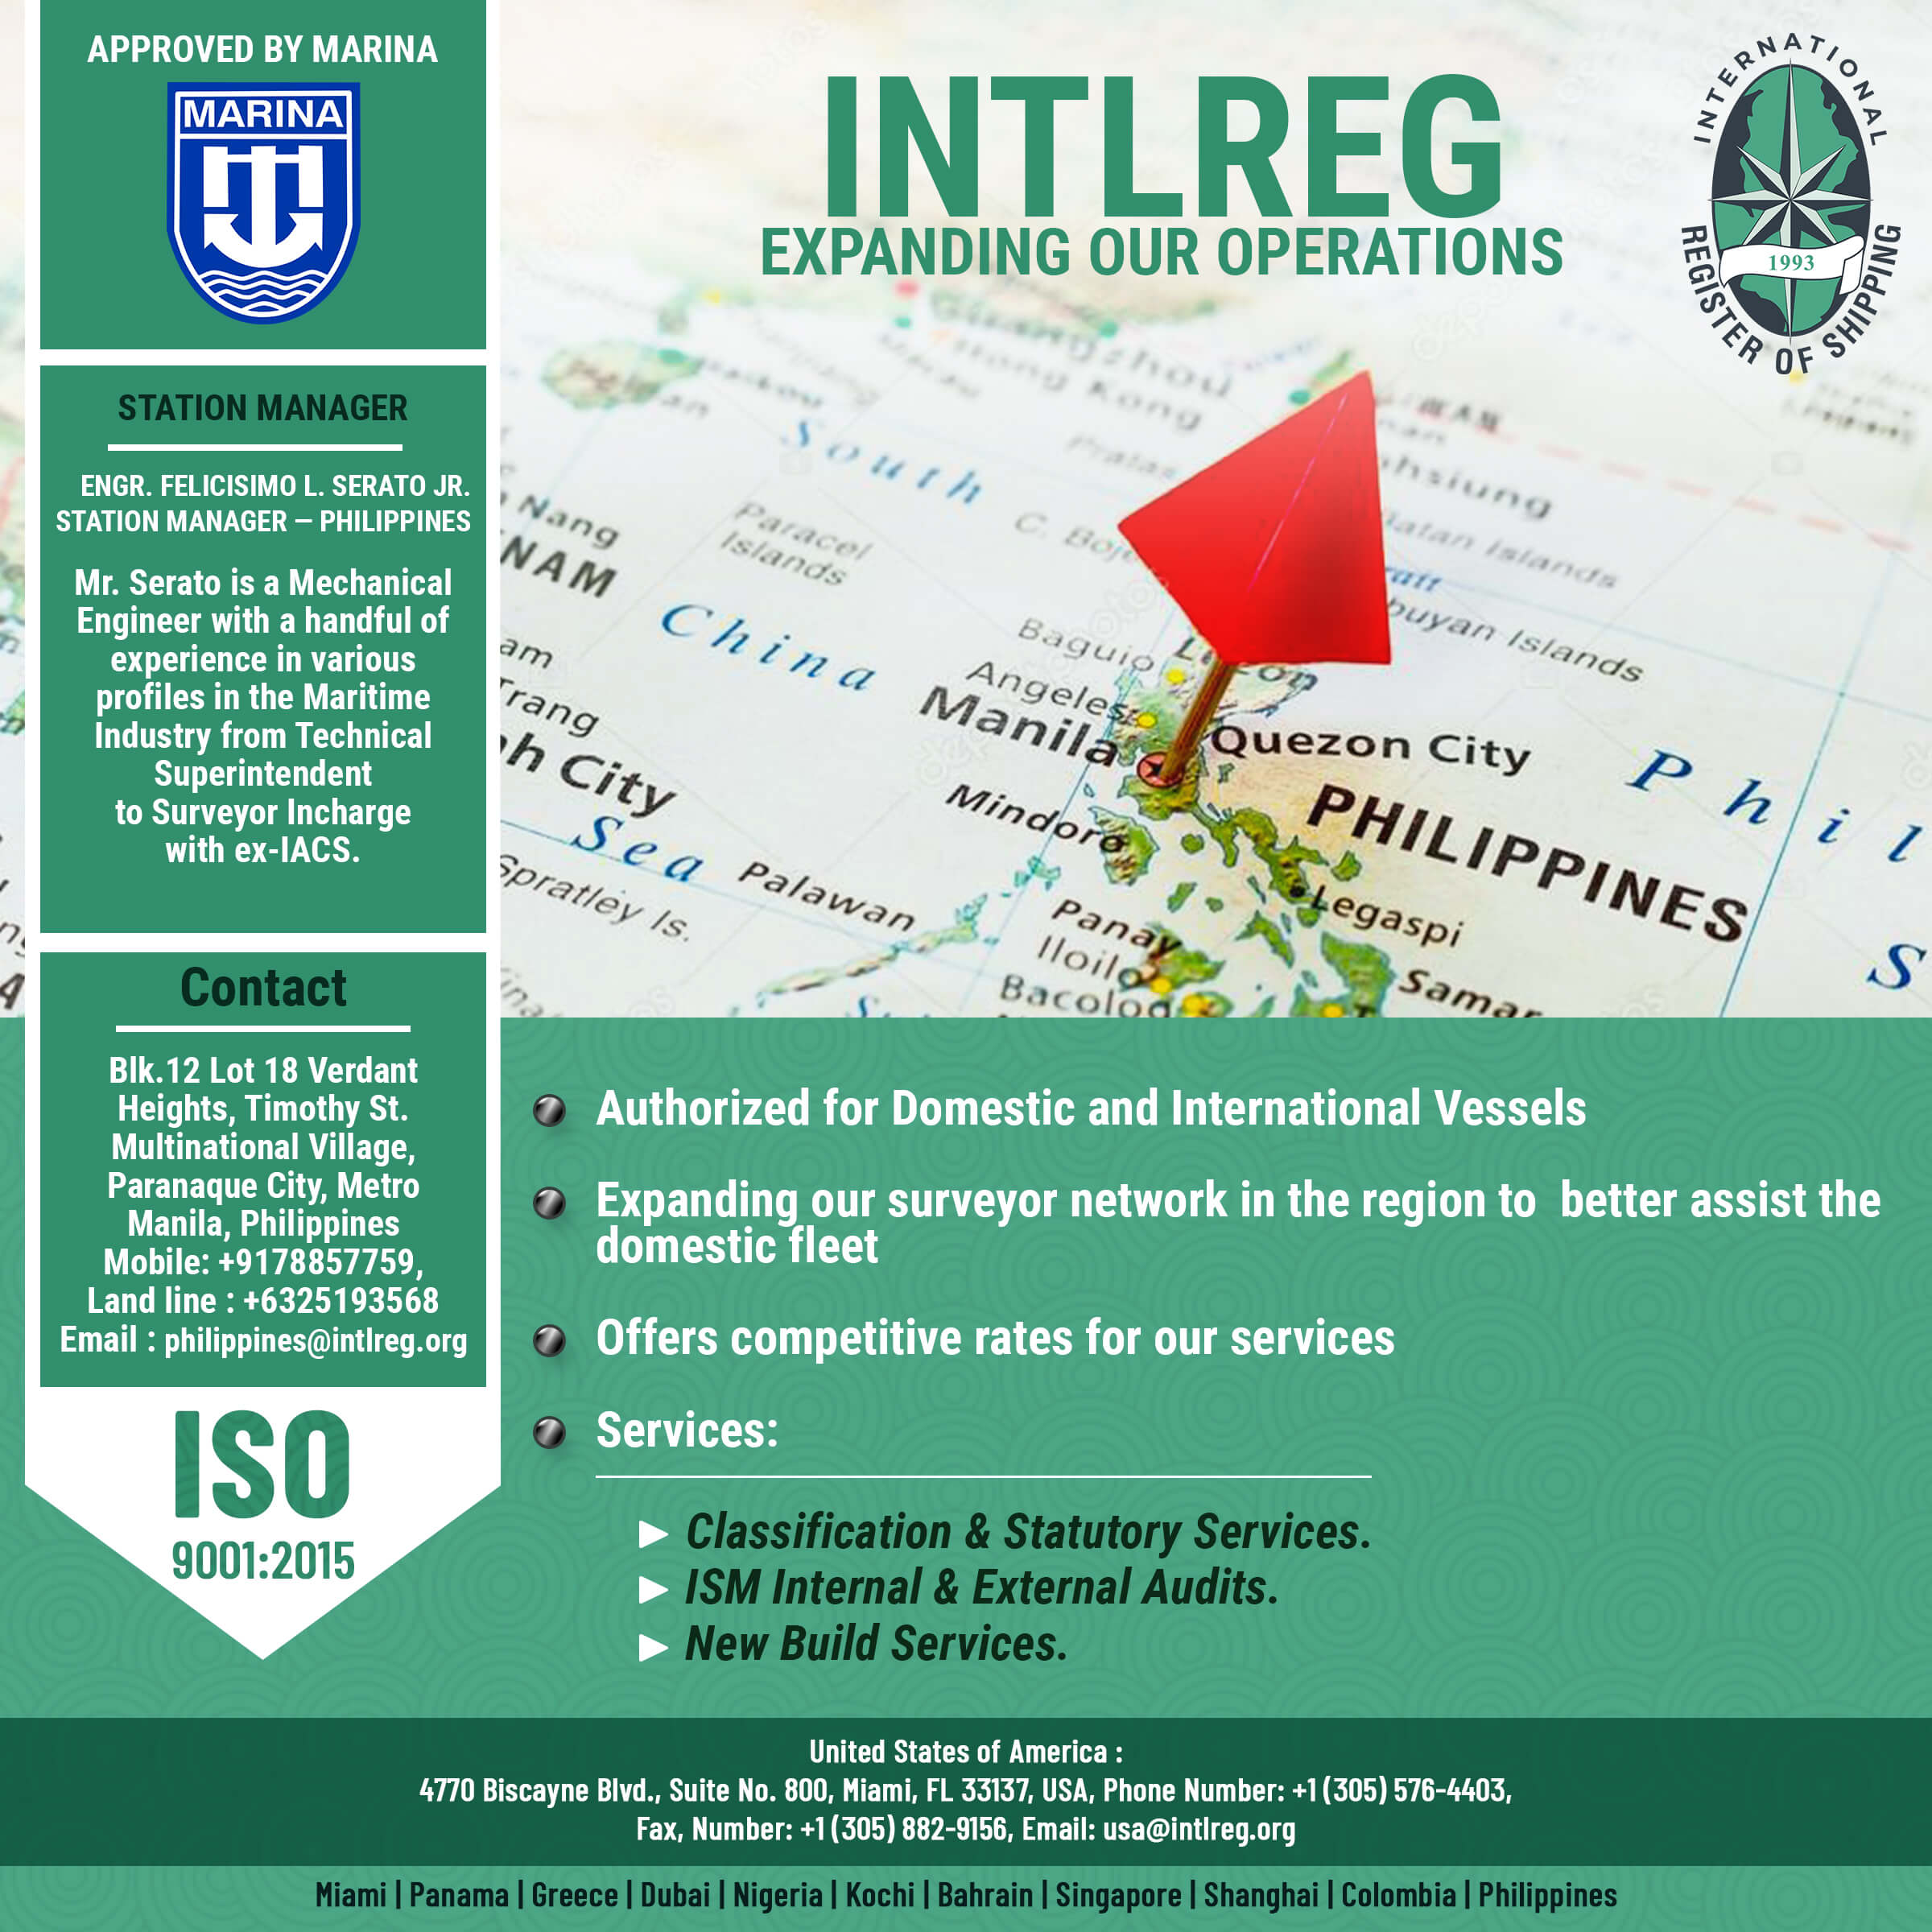 INTLREG – Expanding our operations at Philippines